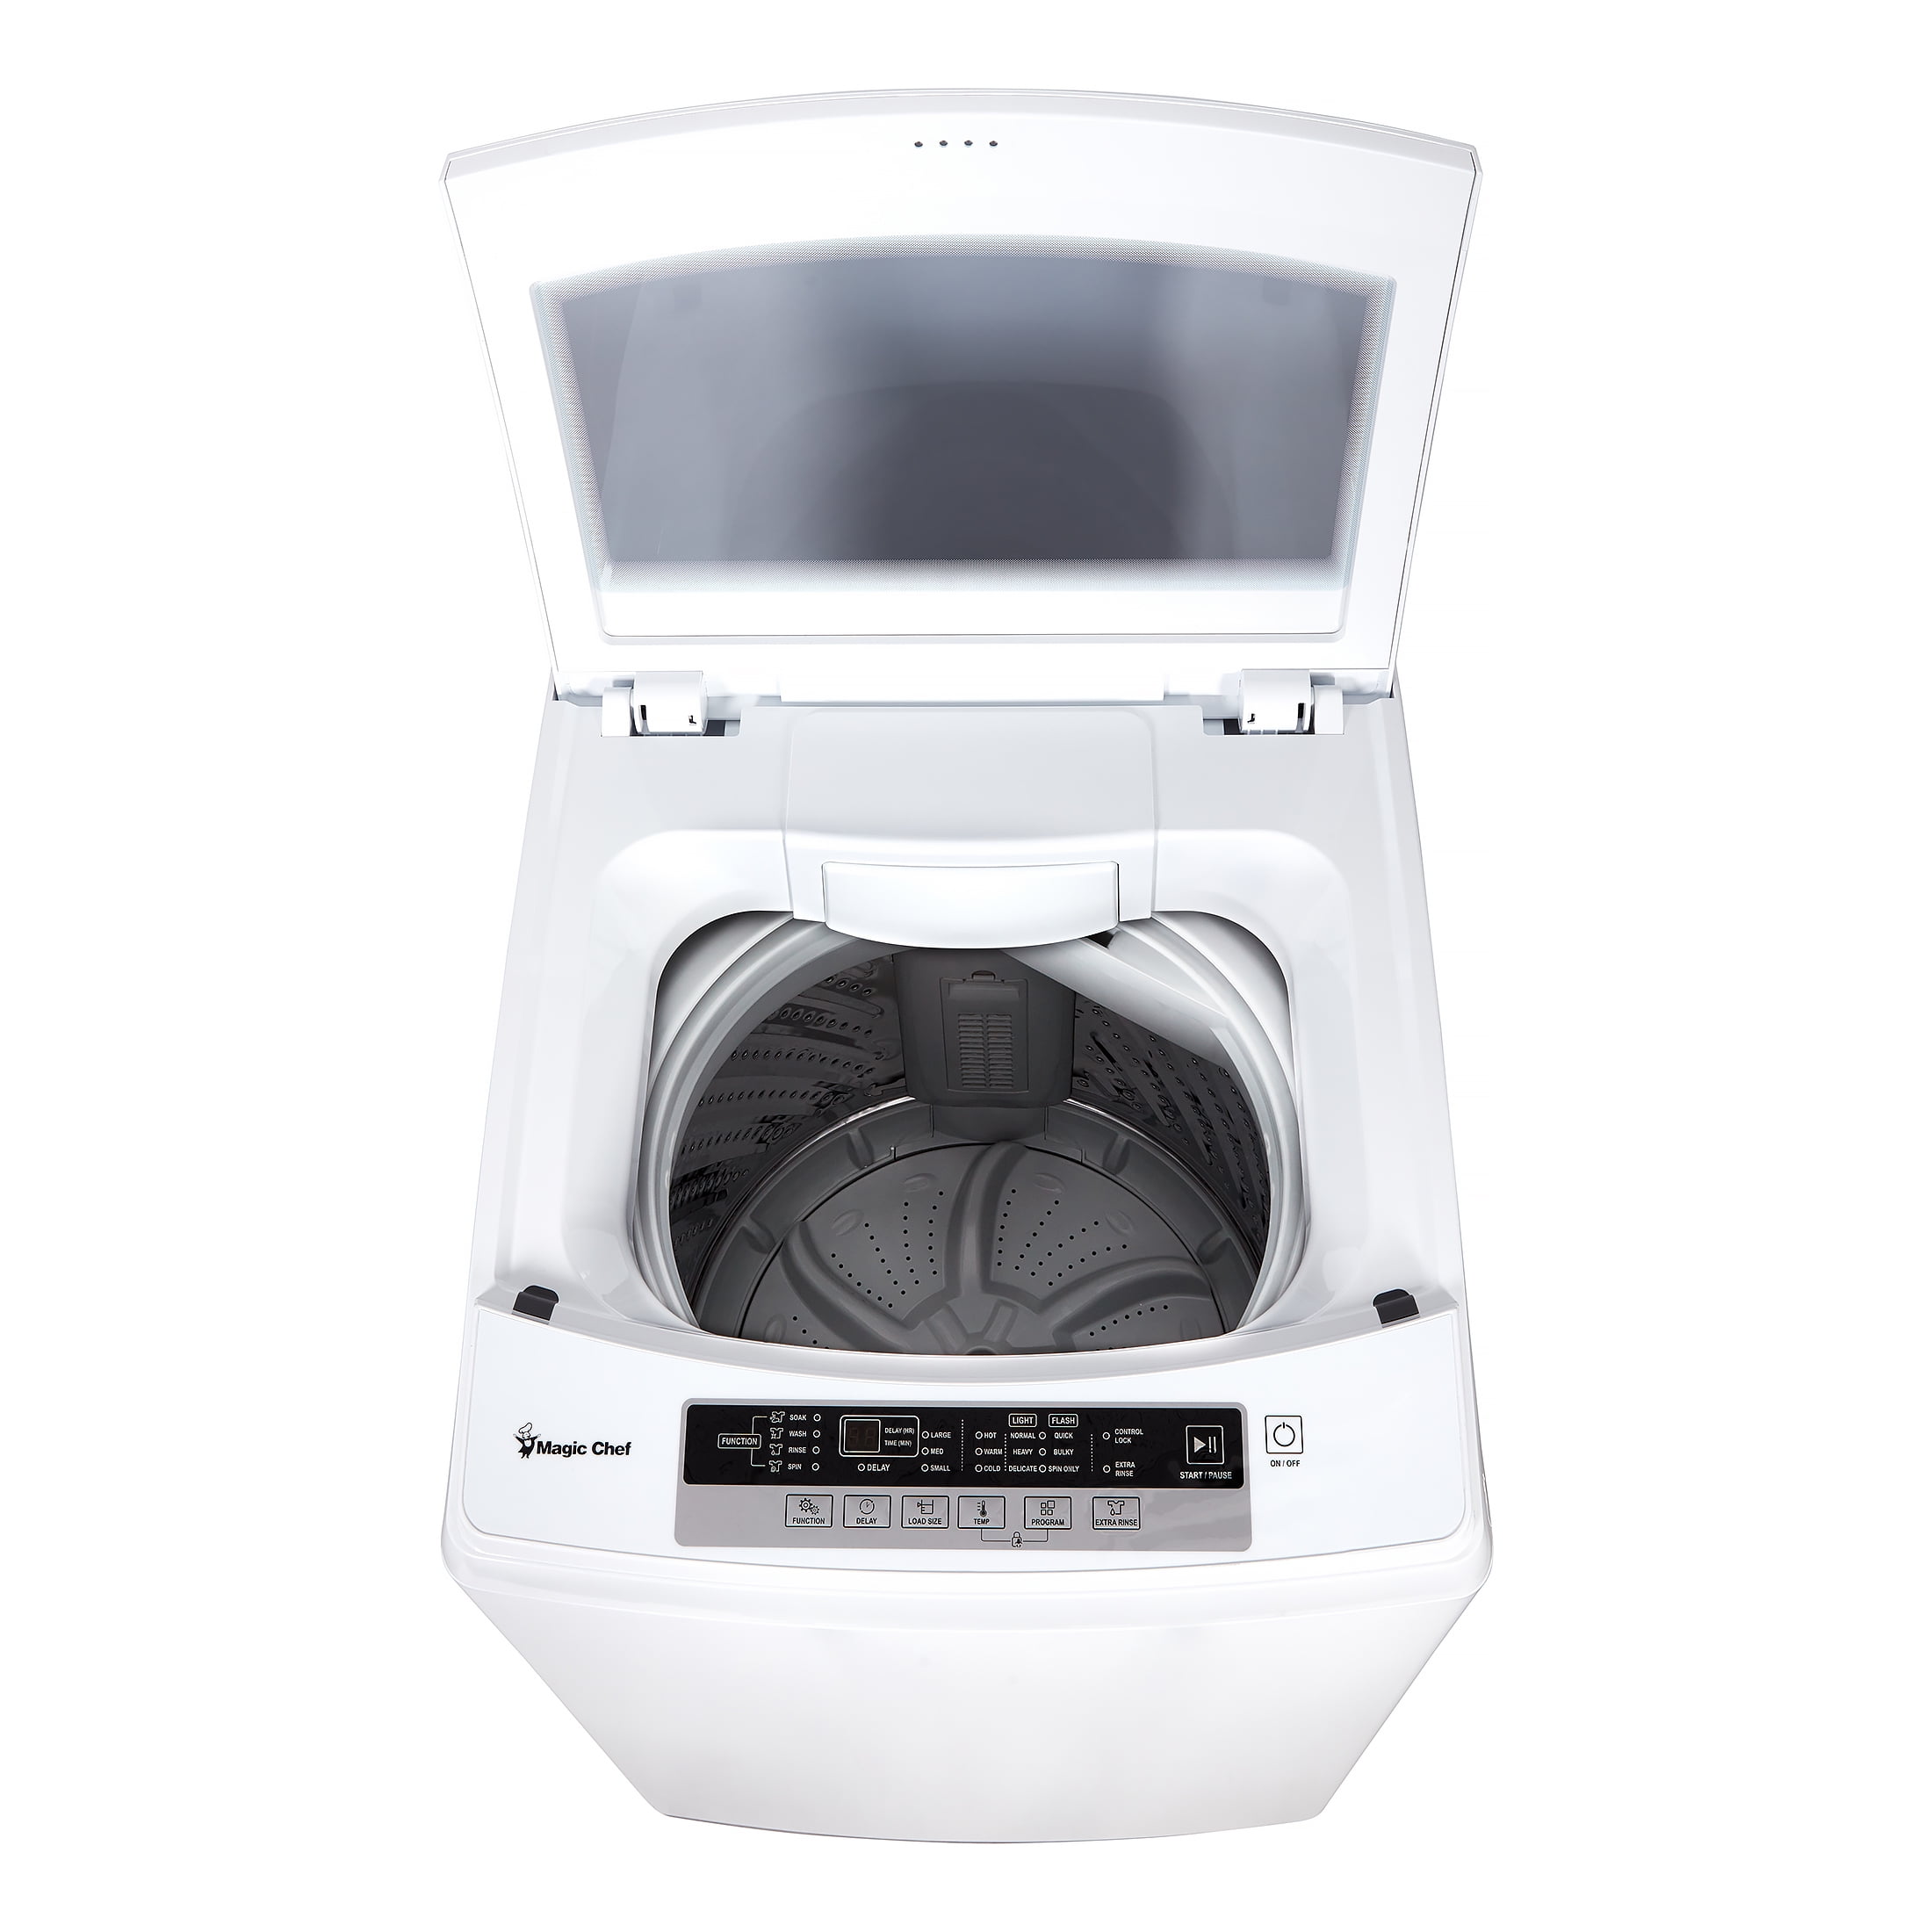 Magic Chef 2.1 Cu. Ft. Portable Washer - appliances - by owner - sale -  craigslist